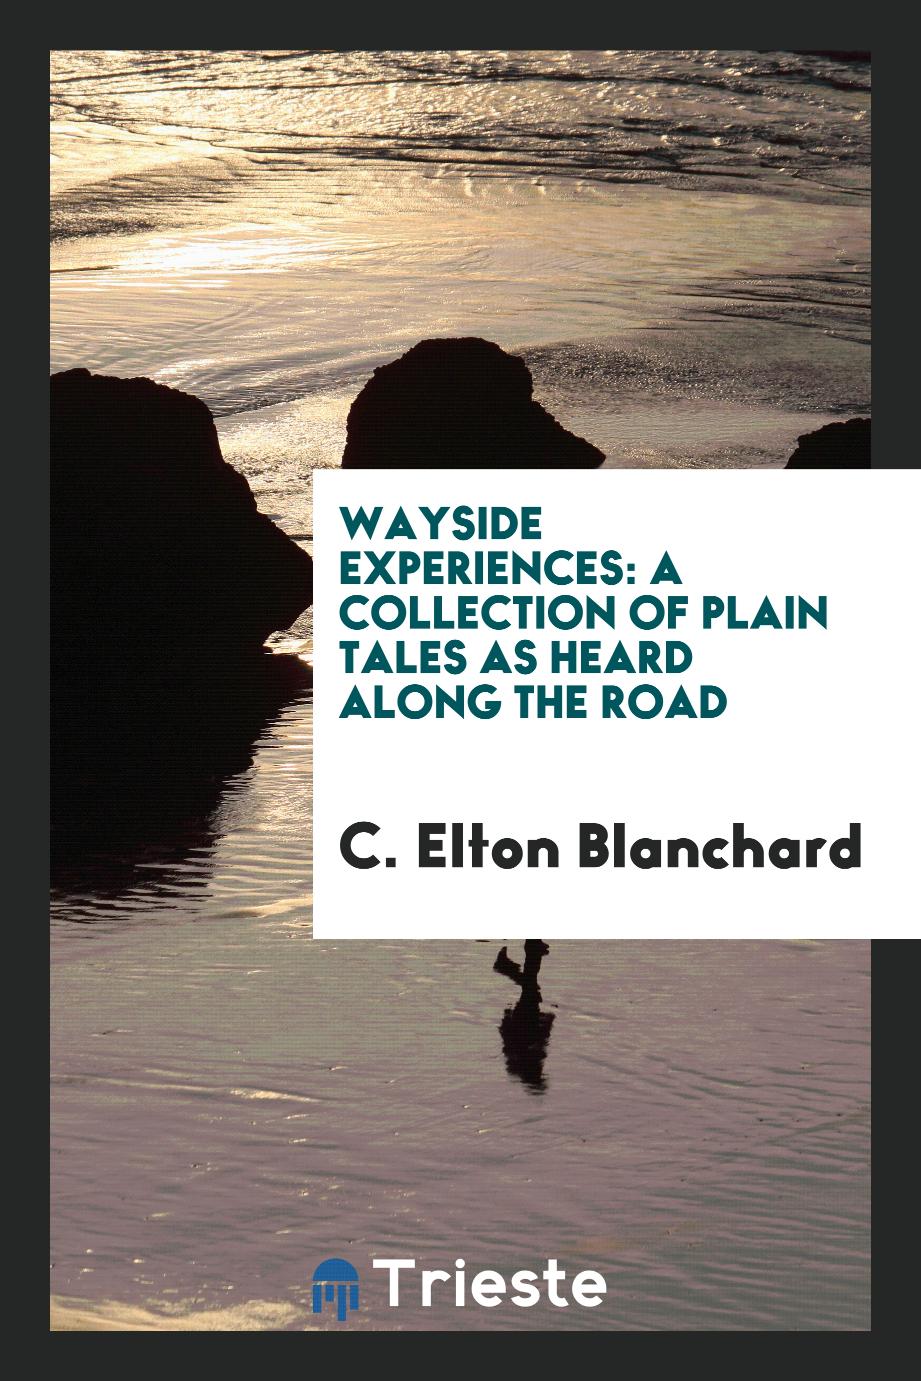 Wayside Experiences: A Collection of Plain Tales as Heard Along the Road